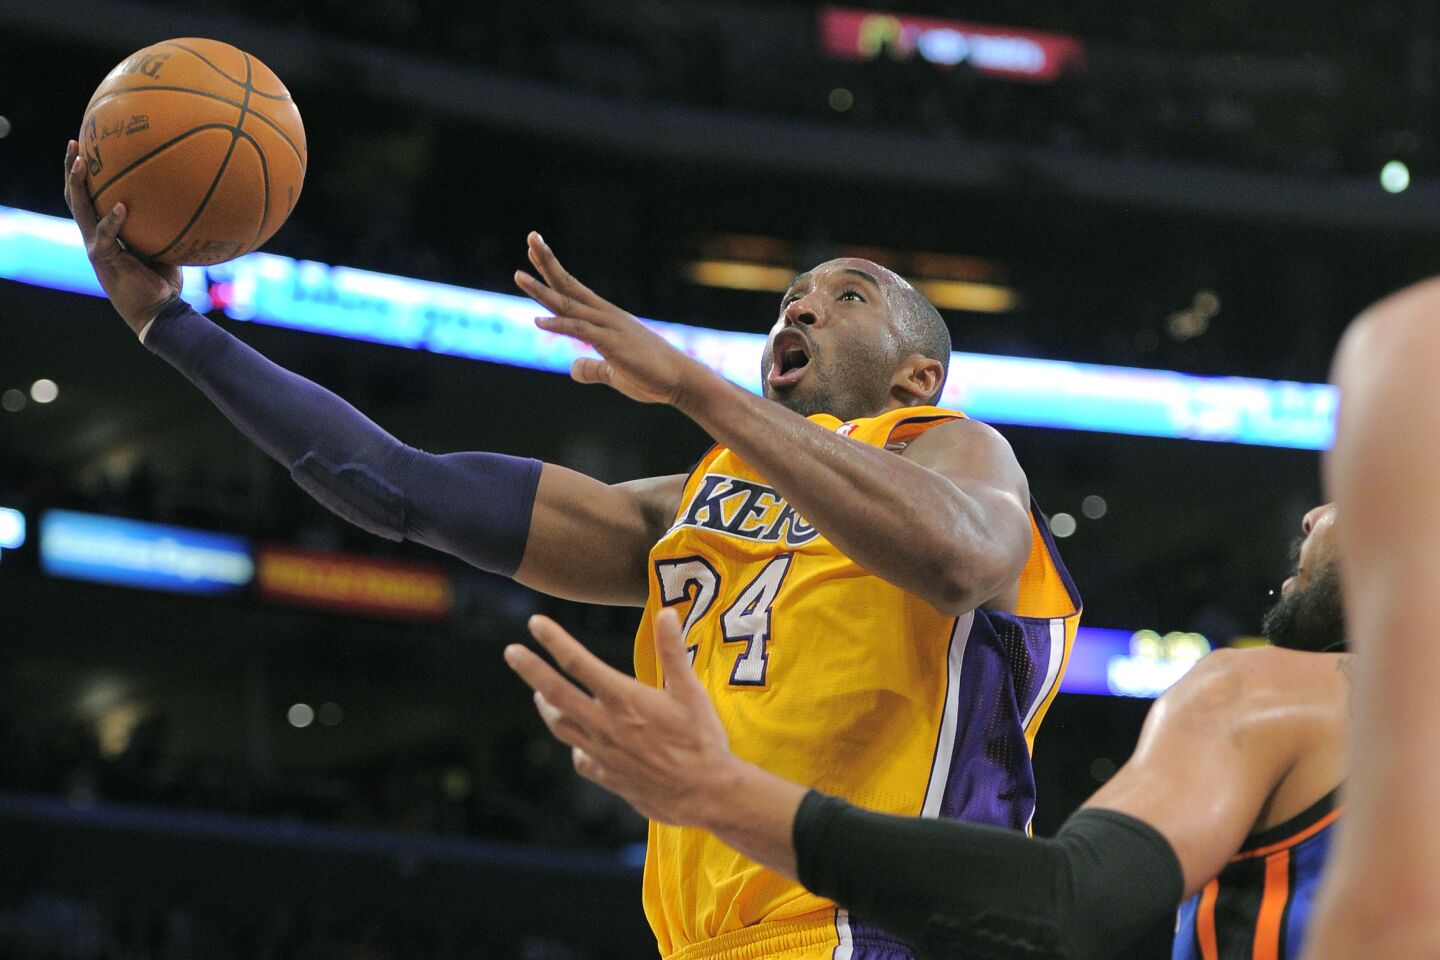 Kobe Bryant goes up for a shot over New York Knick Tyson Chandler.